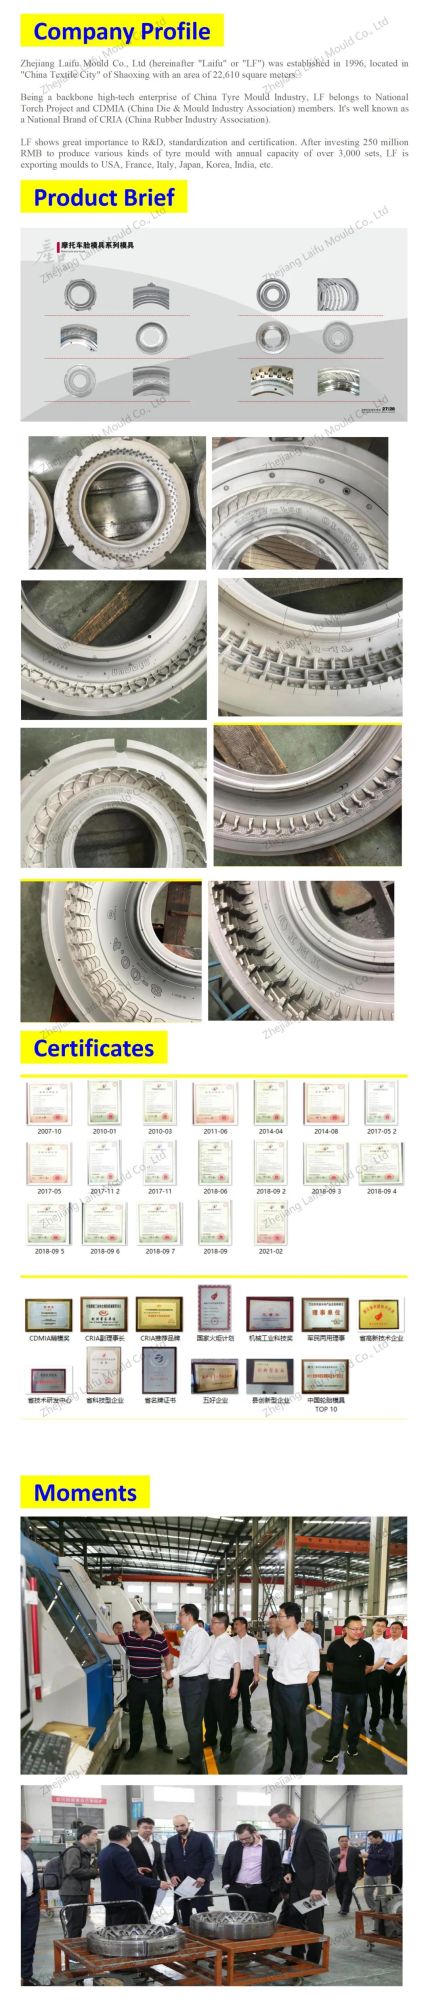 Motor/Scooter Tyre Mould 140/70-17 Lf29zs